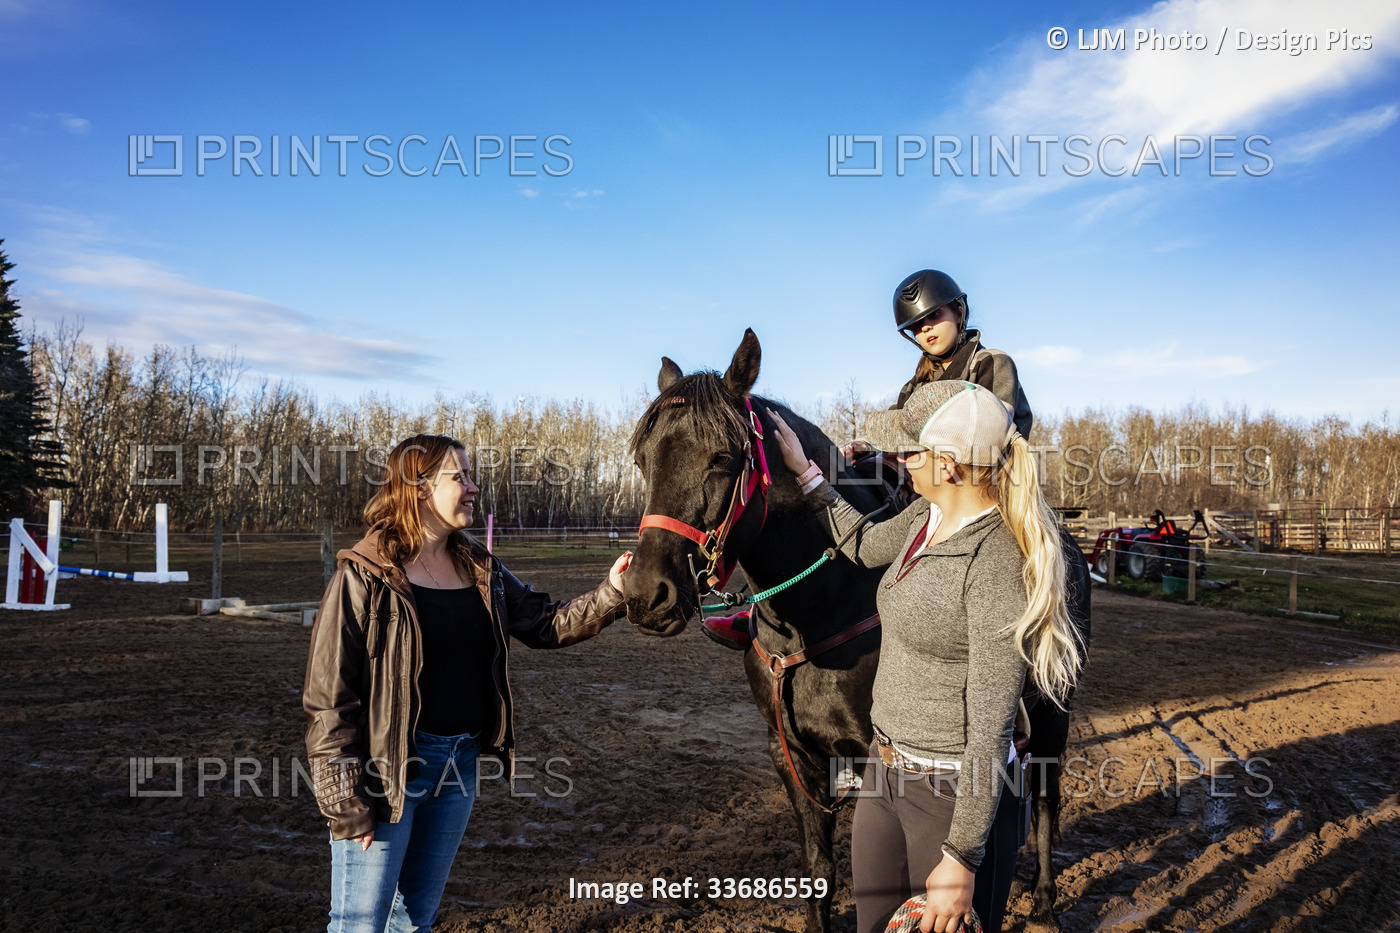 A young girl with Cerebral Palsy, her Mom and her trainer working with a horse ...